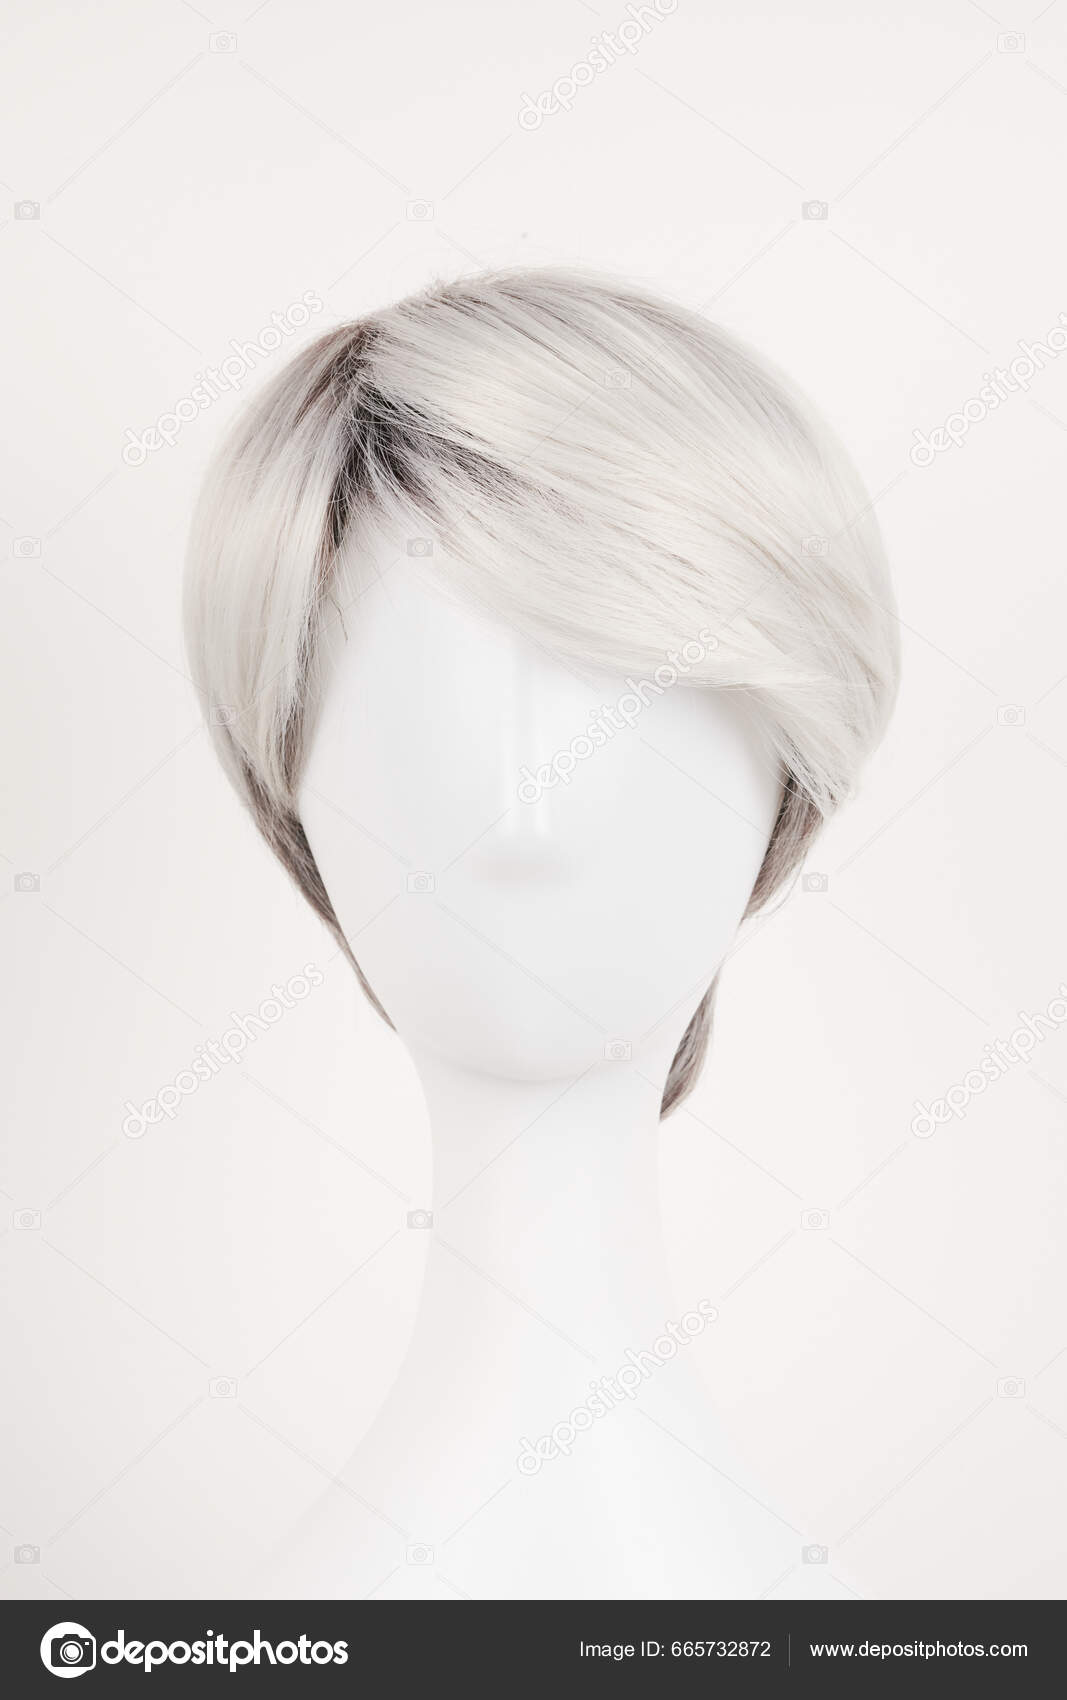 Mannequin Head With Short Silver Wig Stock Photo - Download Image